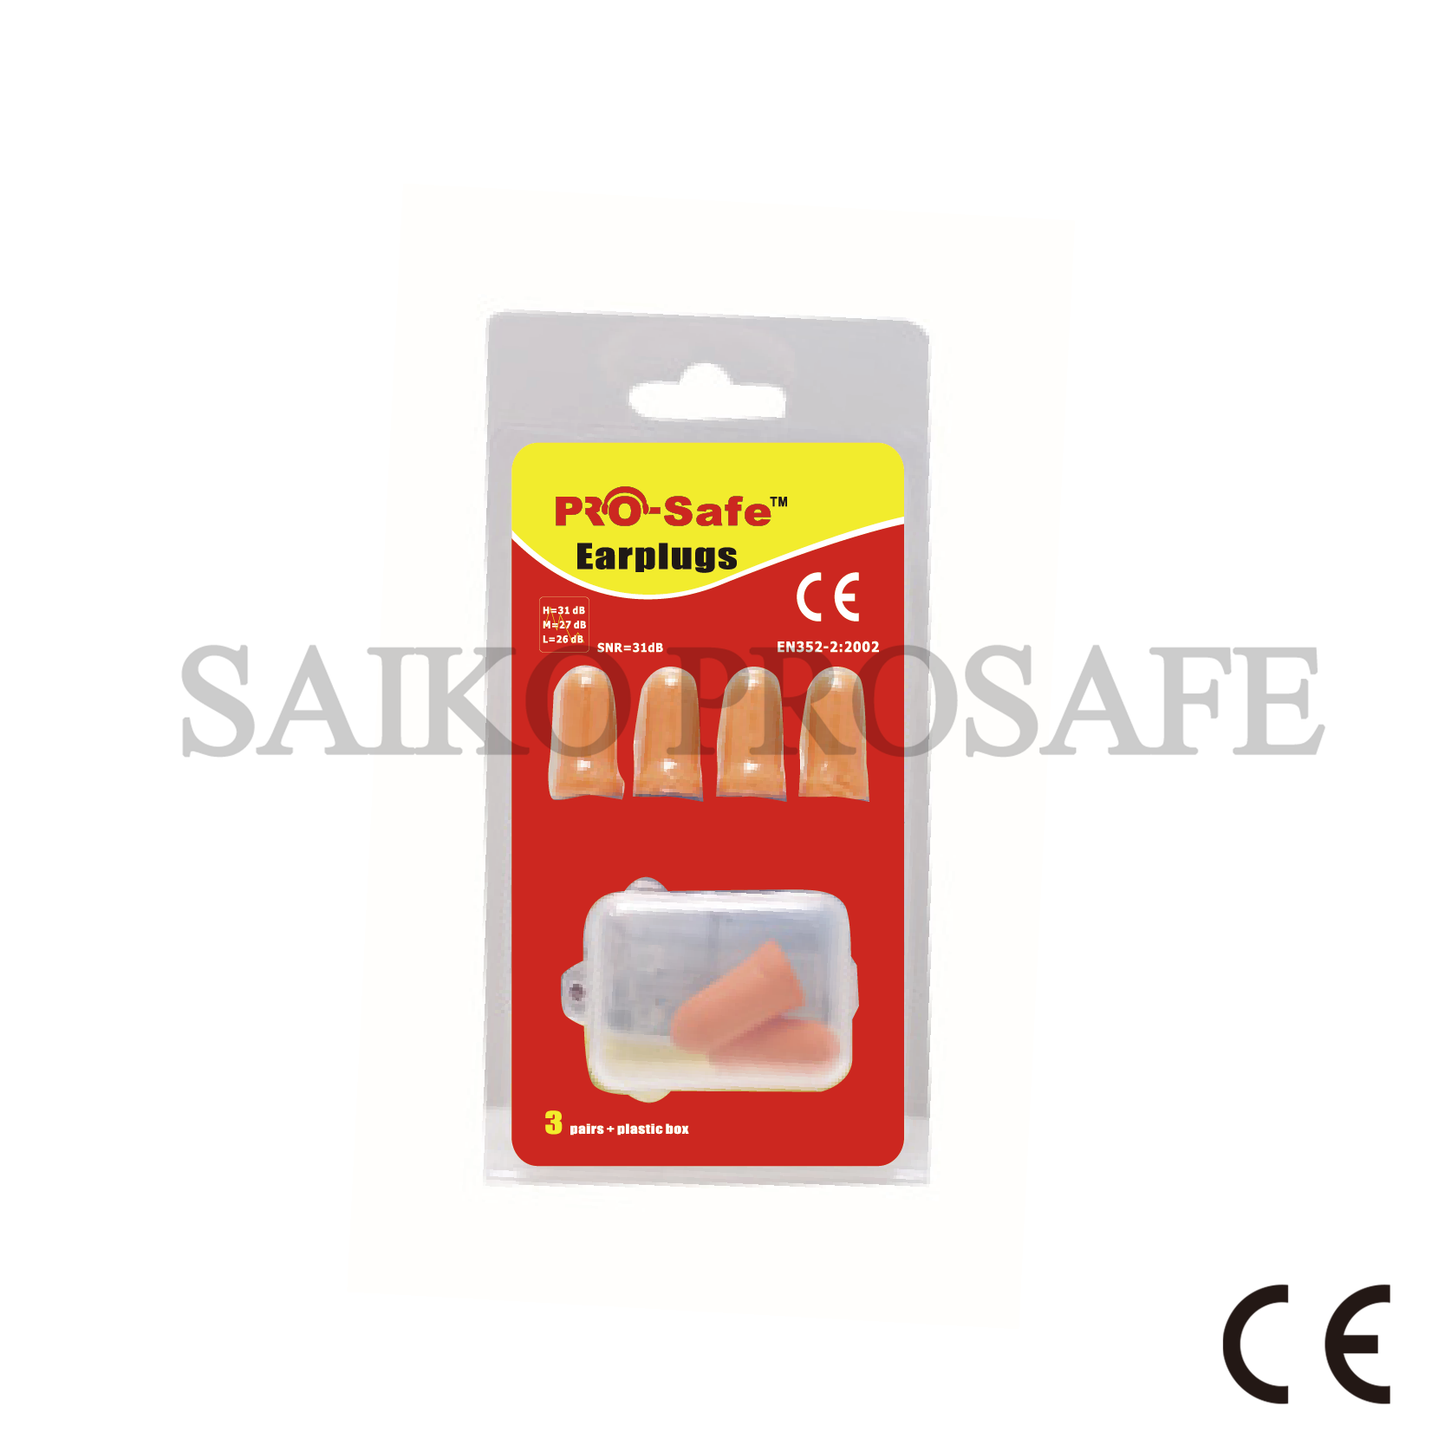 Noise Cancelling Ear Plugs for Sleeping, Travel, Shooting km1503103-p1